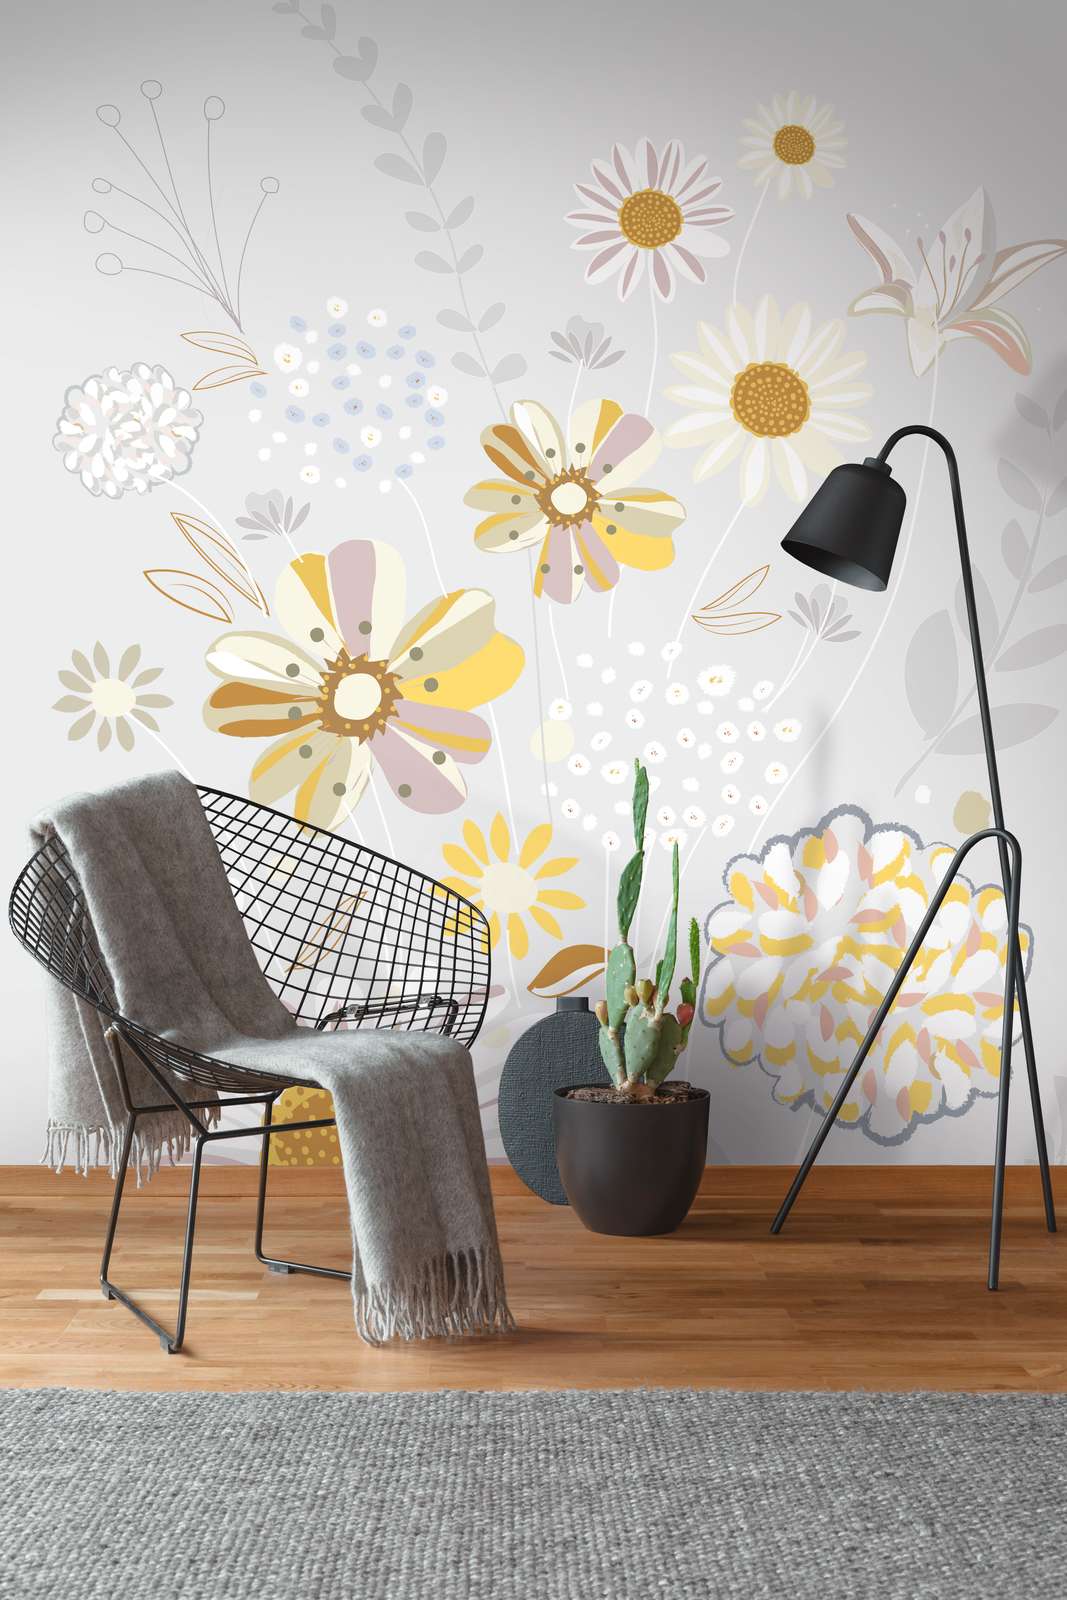             Floral pattern wallpaper with grasses in light colours - grey, yellow, beige
        